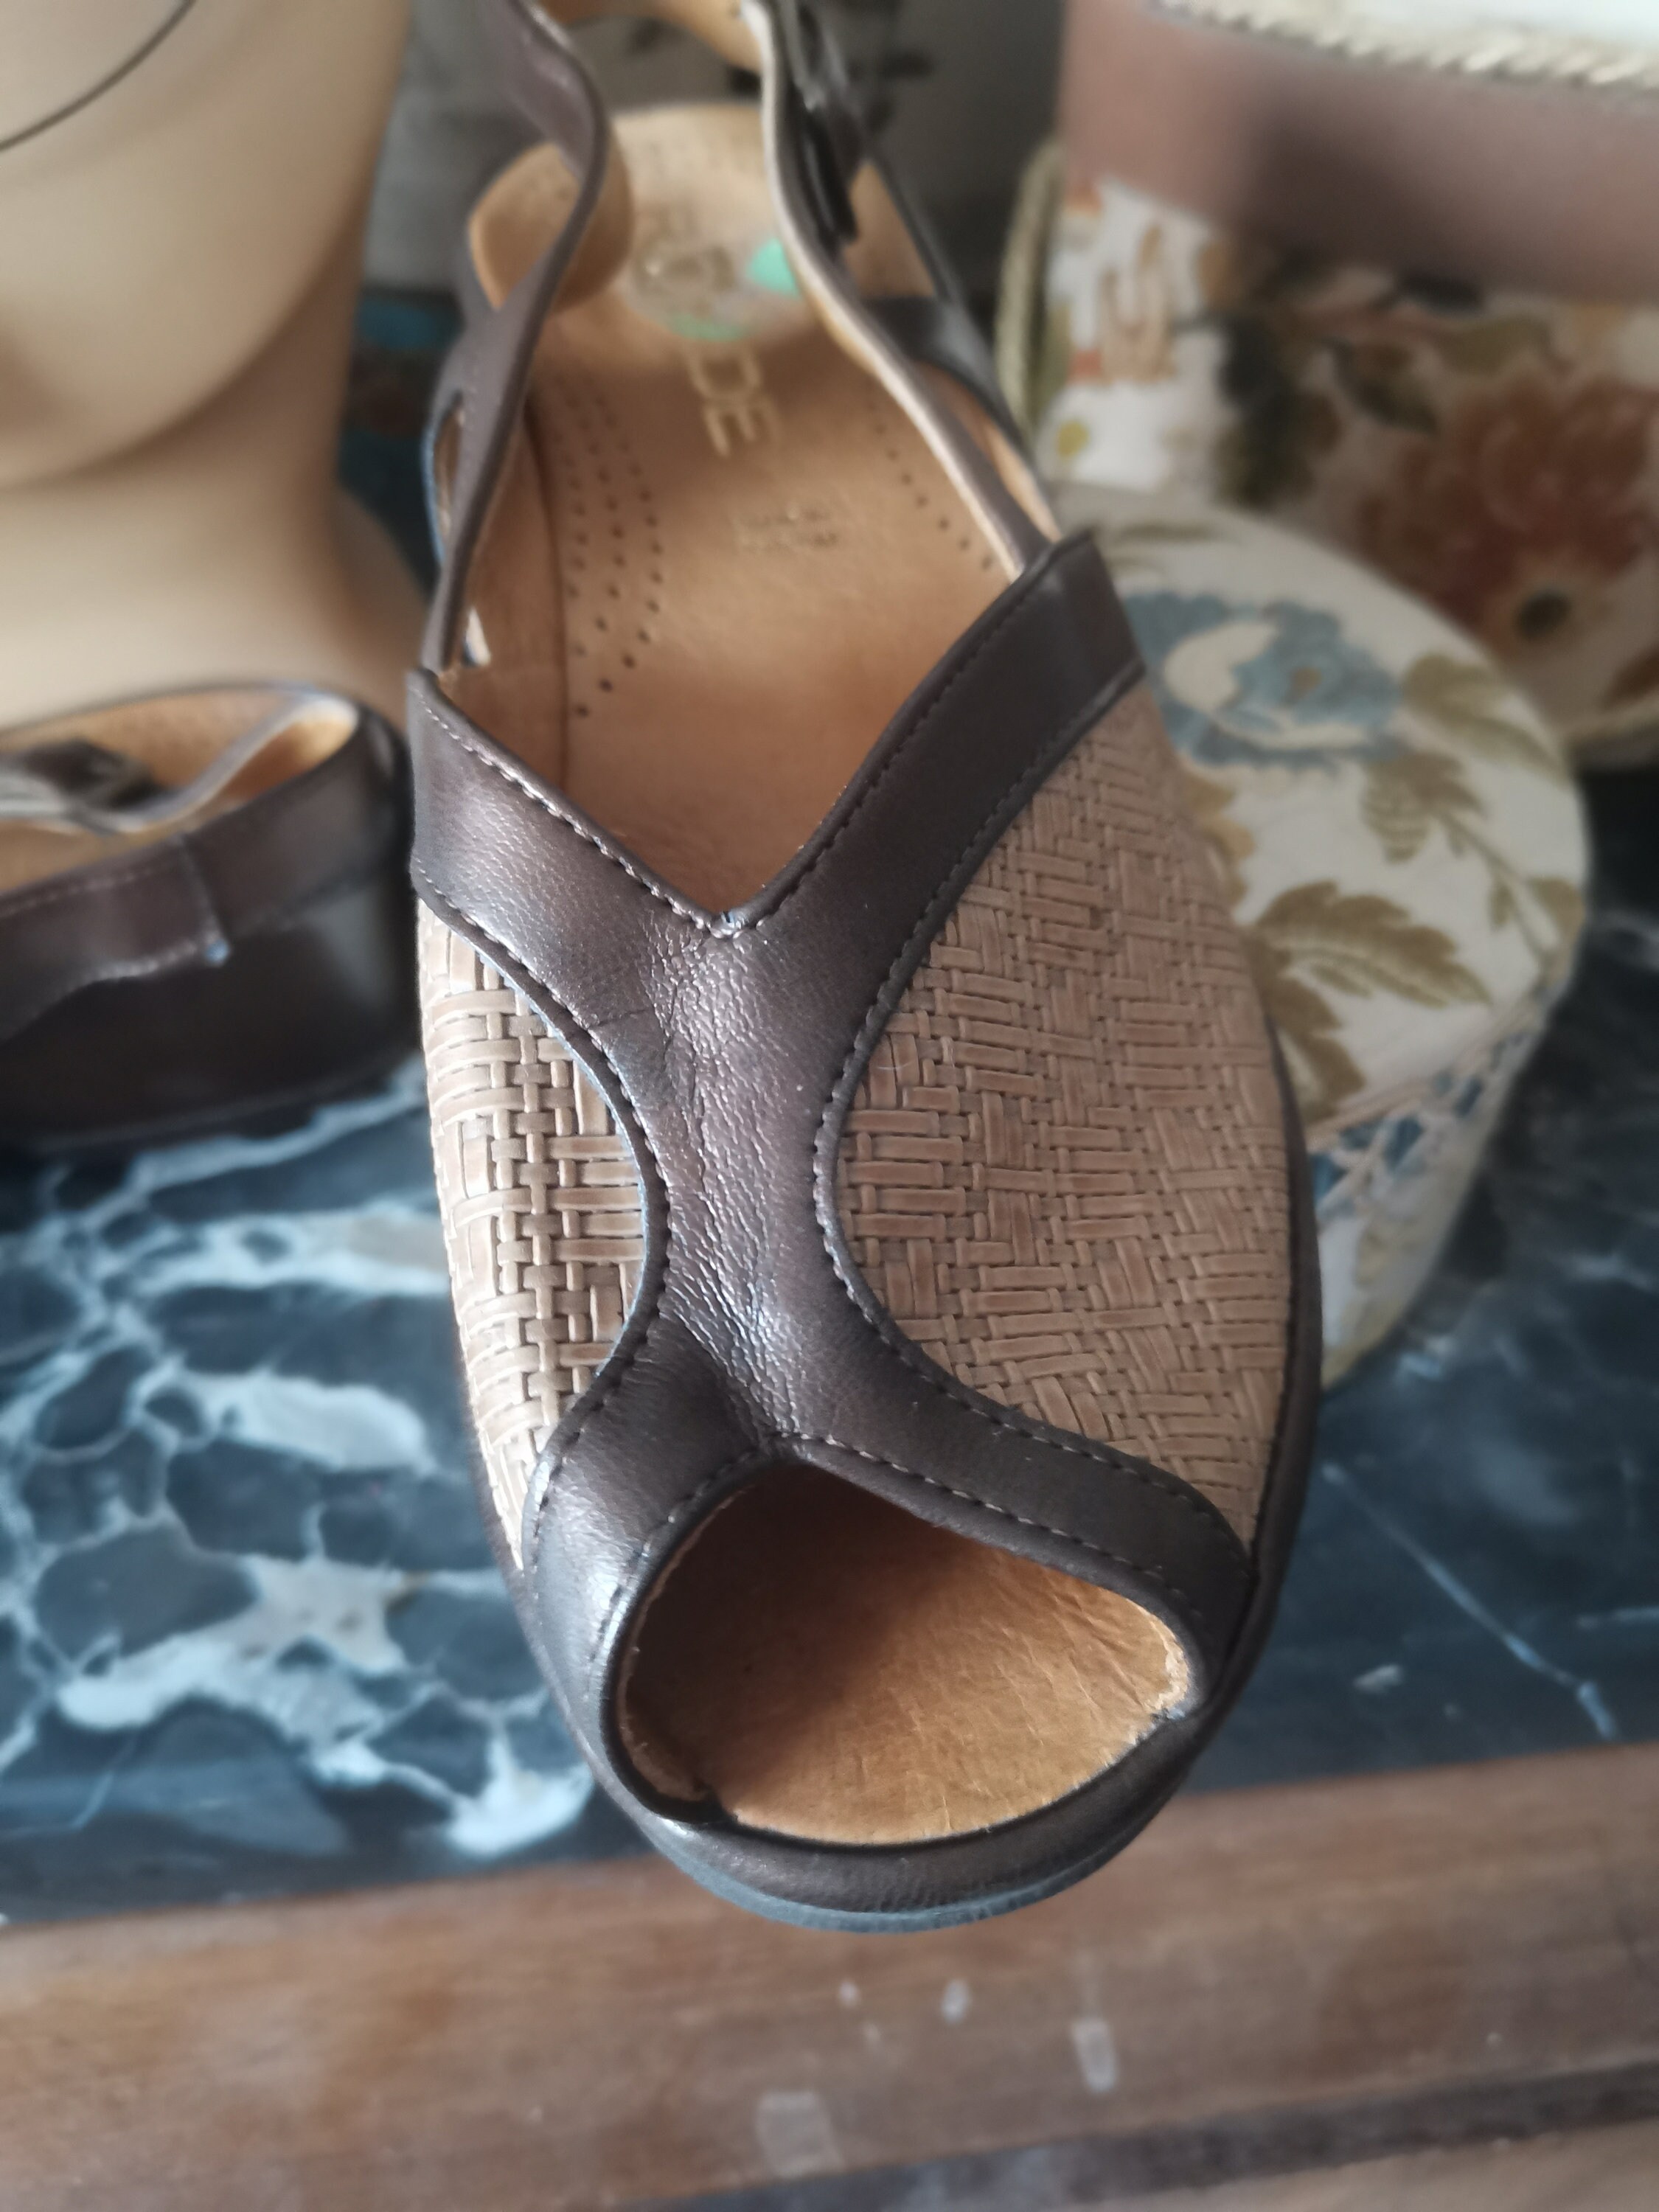 Vintage Does 1940s 1950s Style Shoes Wedges FR37 UK4 US6 Dead 